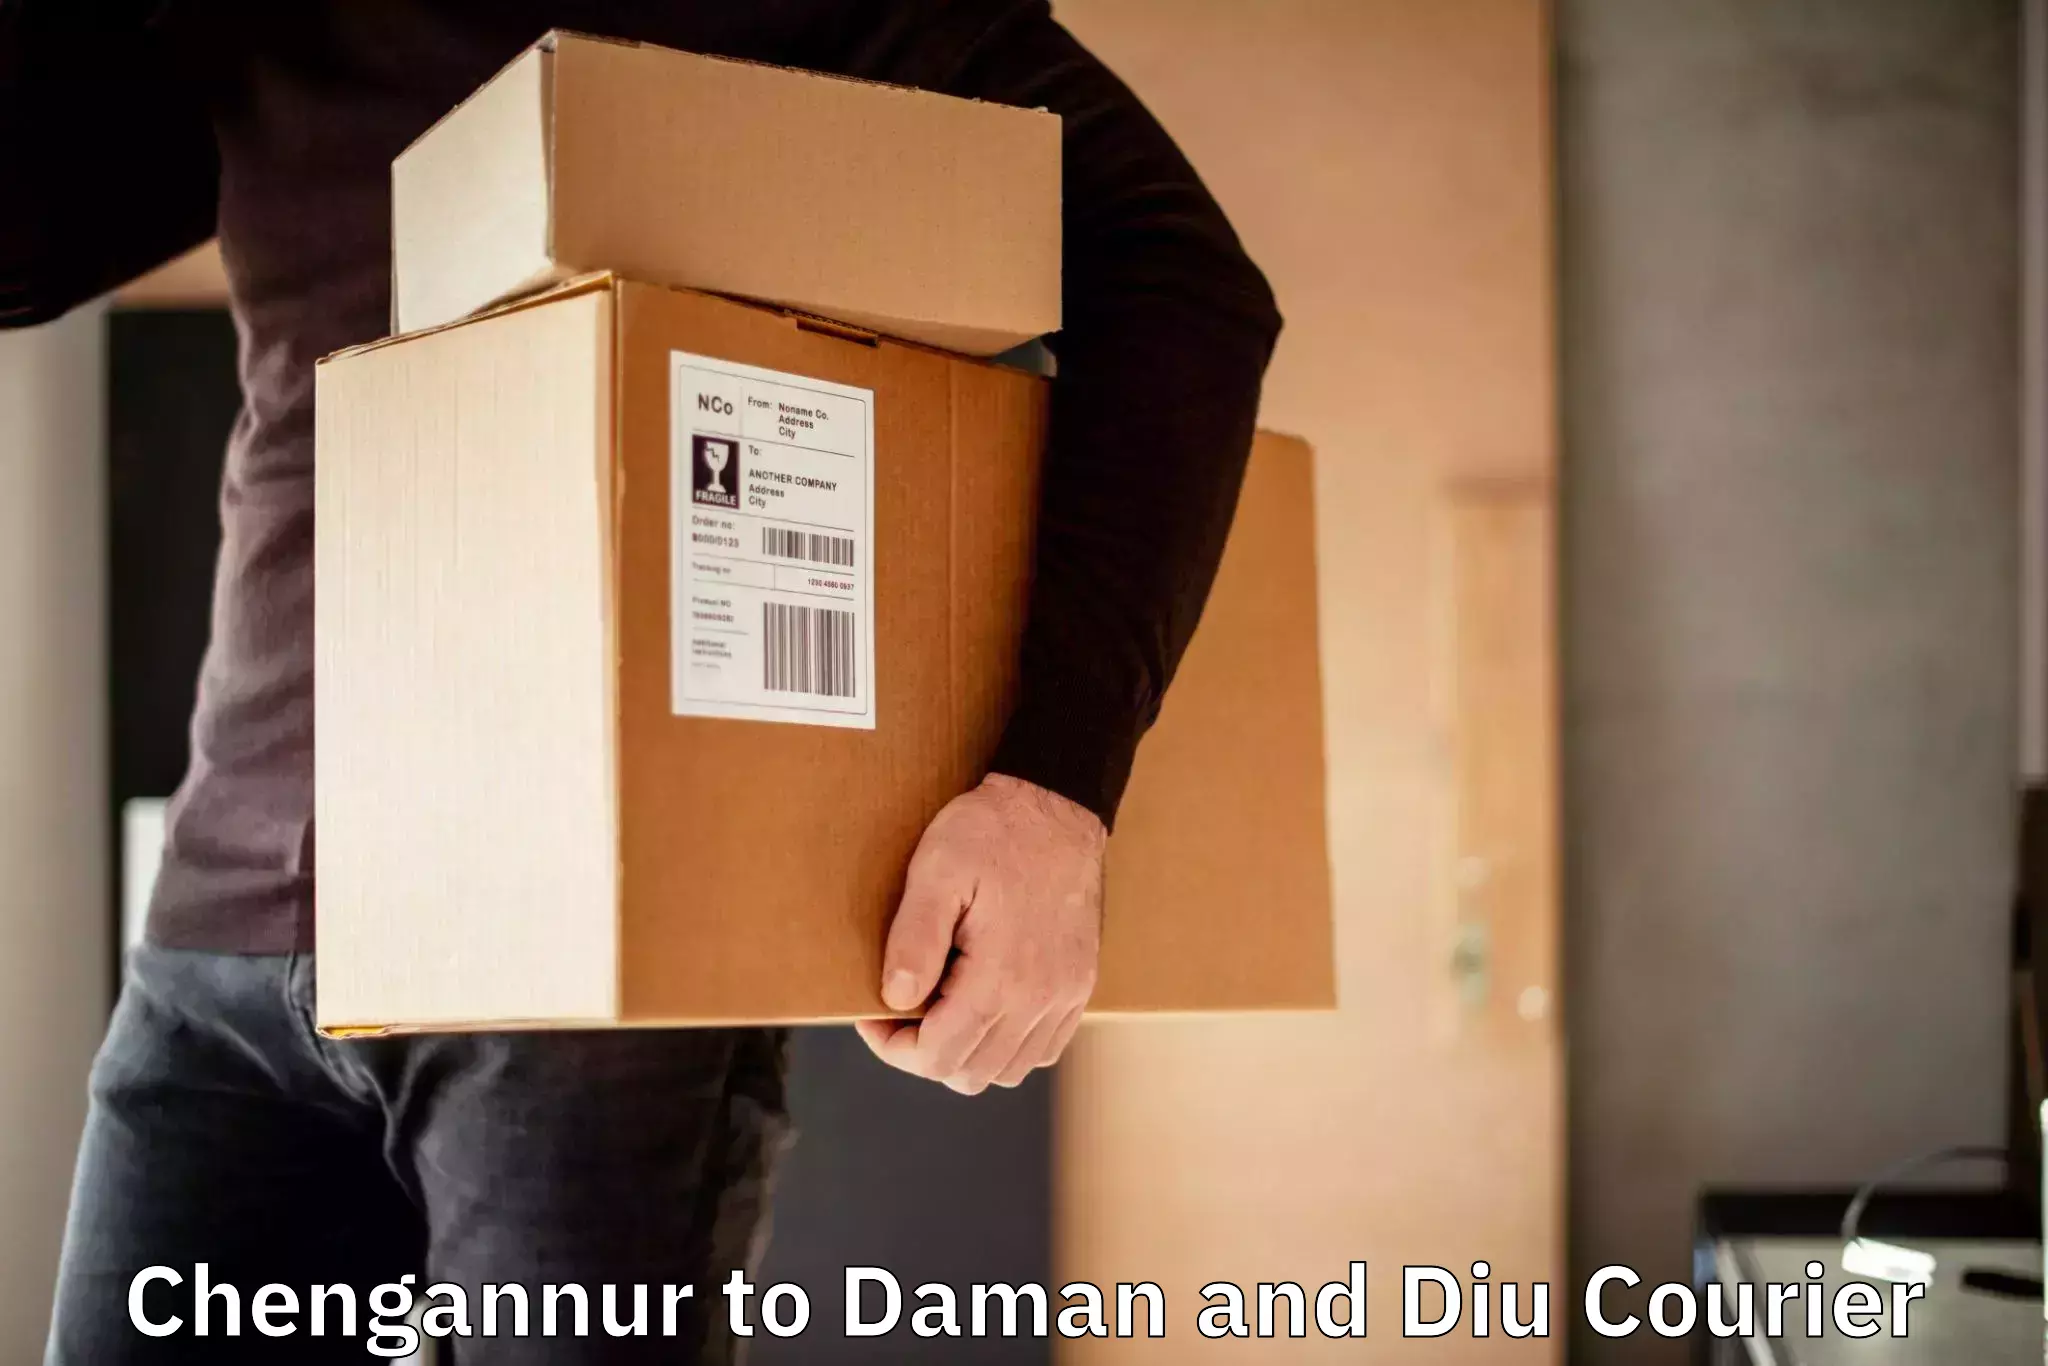 Personal courier services in Chengannur to Daman and Diu